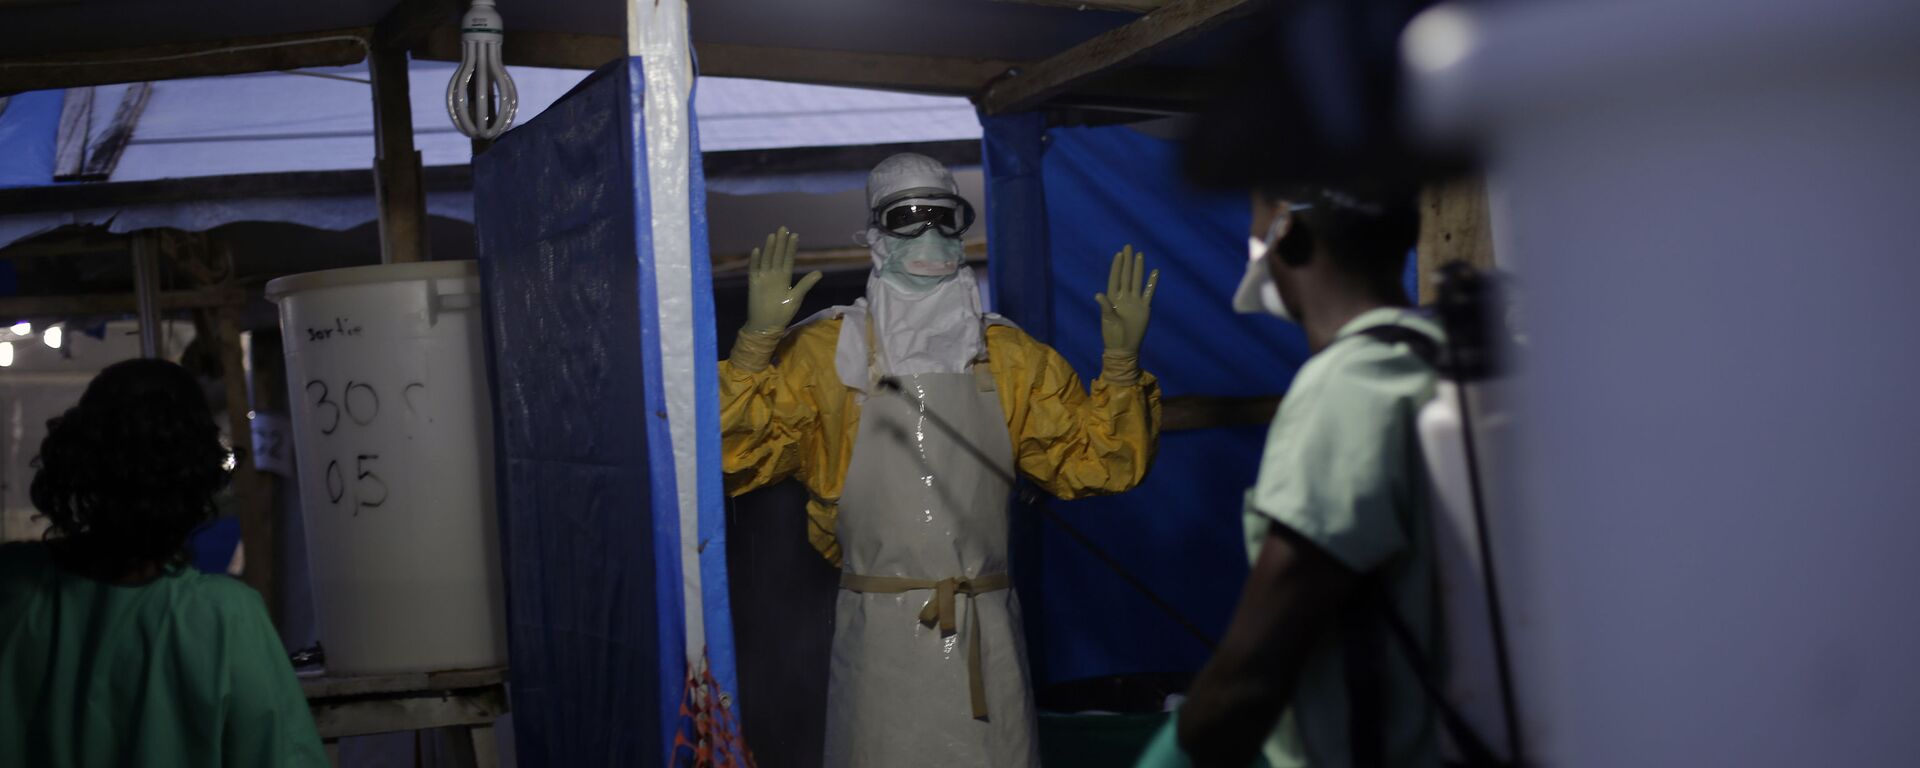 FILE- In this Nov. 20, 2014 file photo, an MSF Ebola heath worker is sprayed as he leaves the contaminated zone at the Ebola treatment centre in Gueckedou, Guinea - Sputnik International, 1920, 23.08.2022